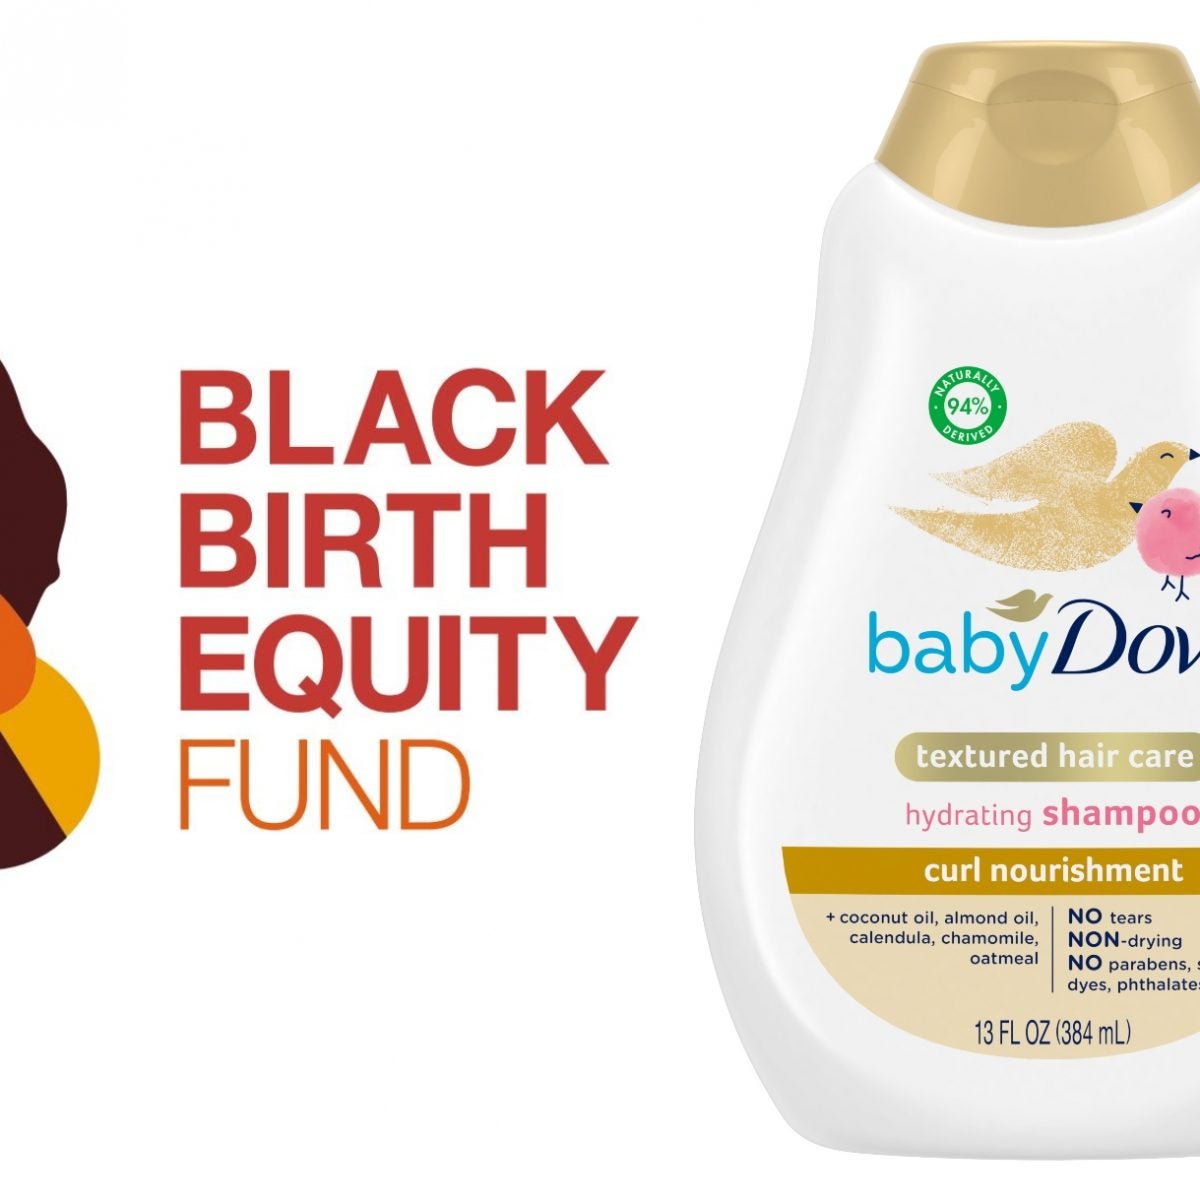 Baby Dove Launches Black Birth Equity Fund To Protect Expectant Moms, "Melanin-Rich" Line To Protect Black Babies